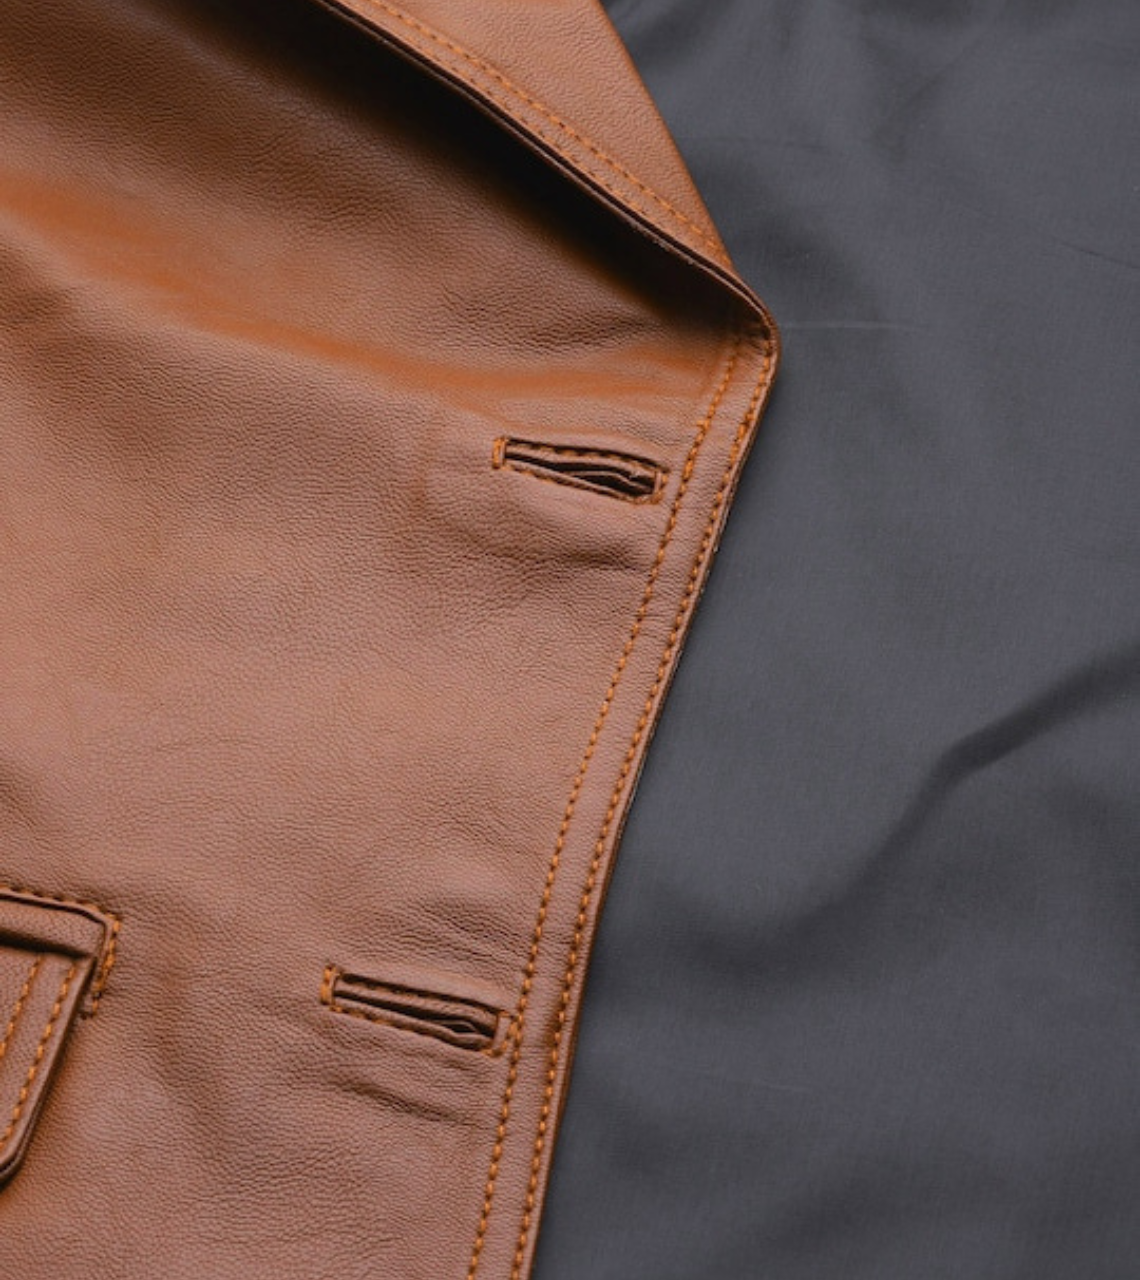  Brown Women's Leather Jacket